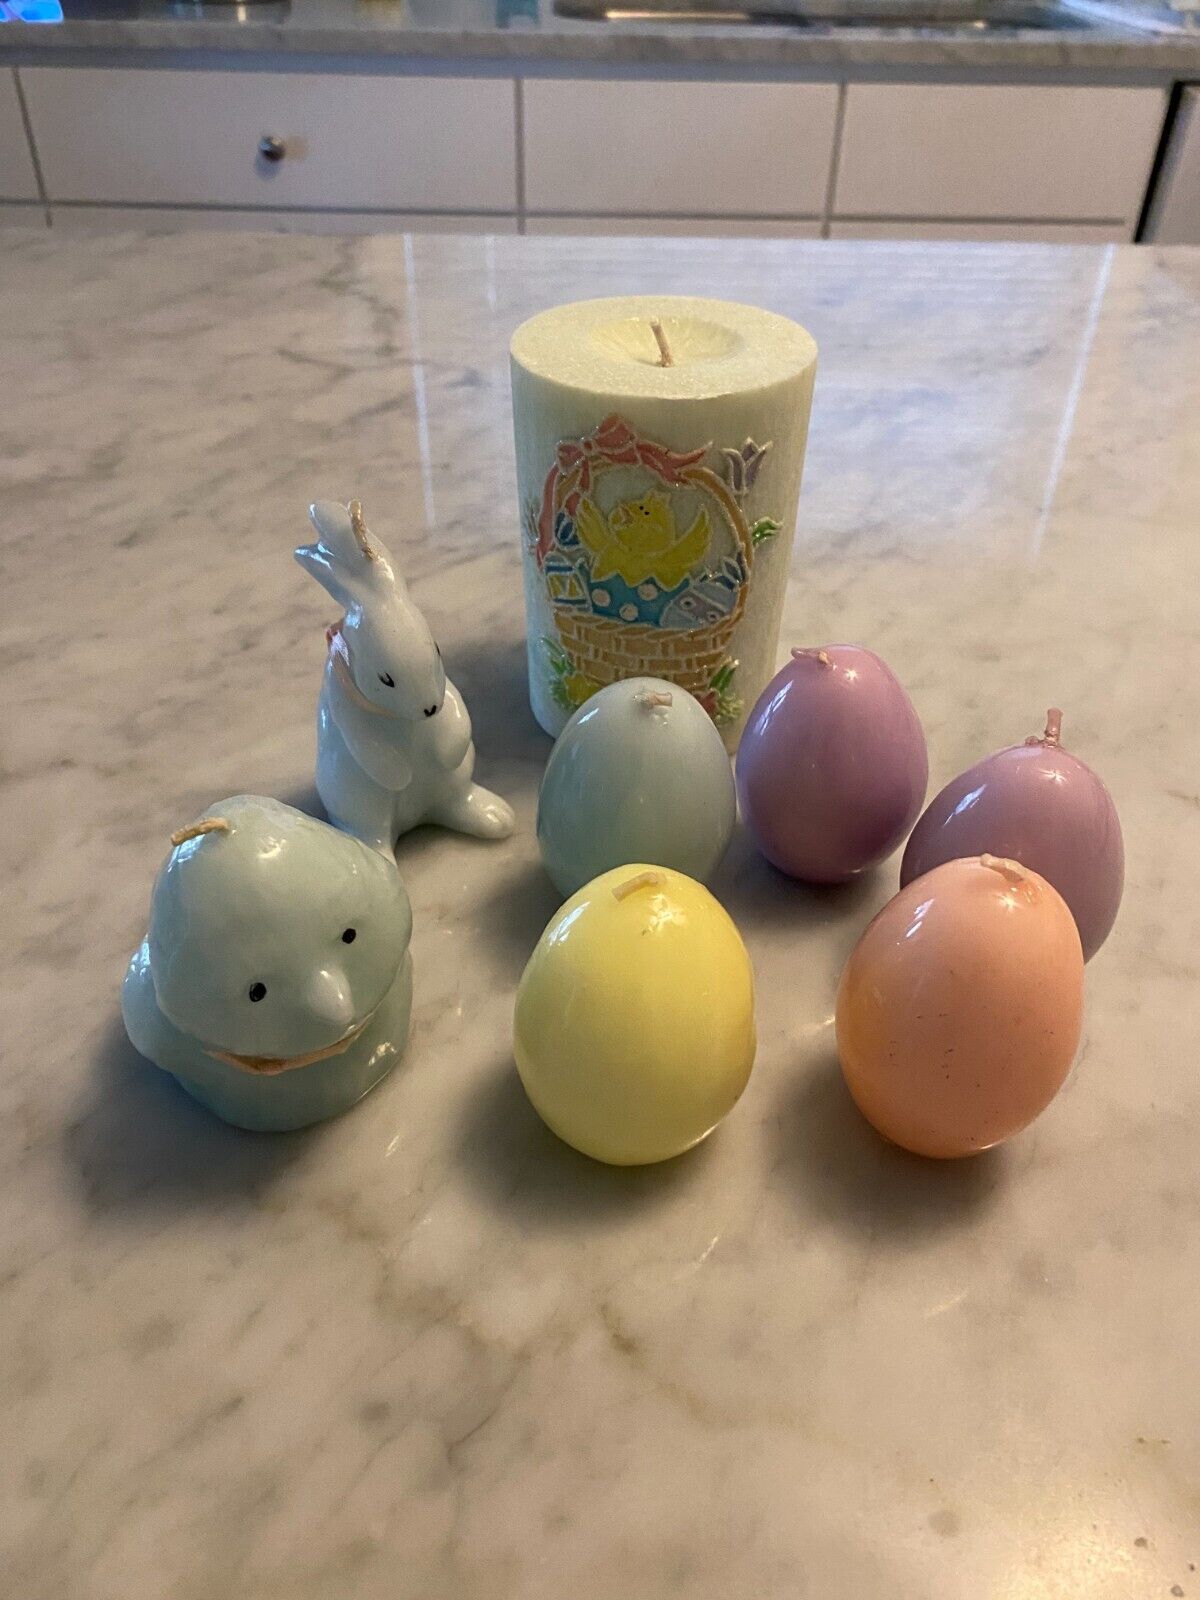 EASTER CANDLE COLLECTION - FIVE EGGS, BUNNY, CHICK, DECORATIVE CANDLE